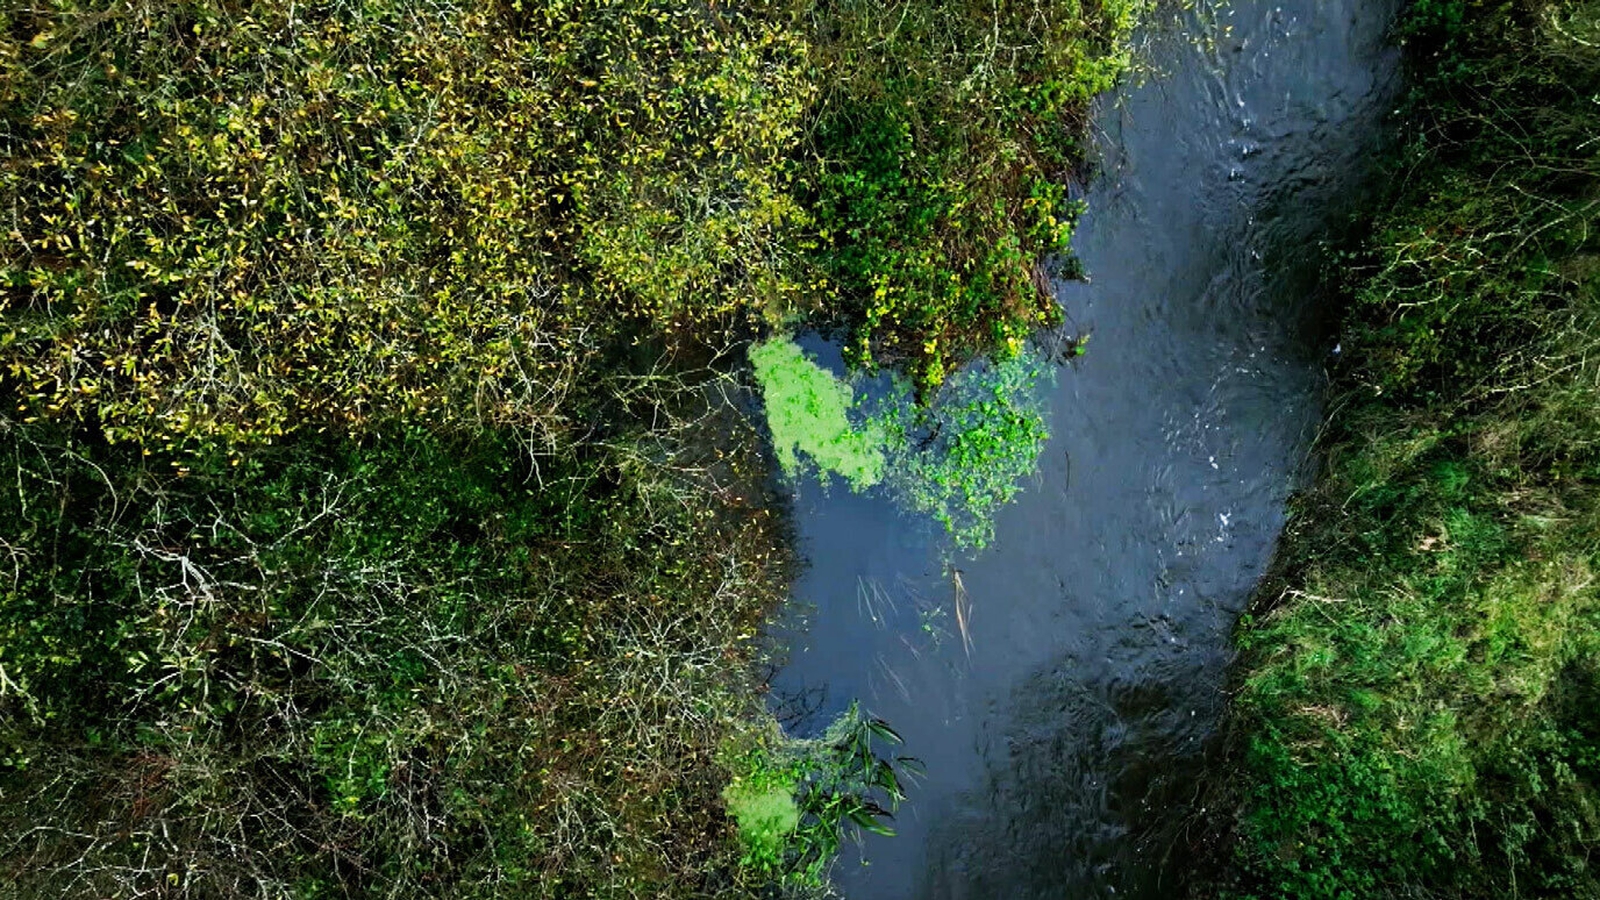 Image - Pollutants in the waters are promoting lush growth of vegetation.